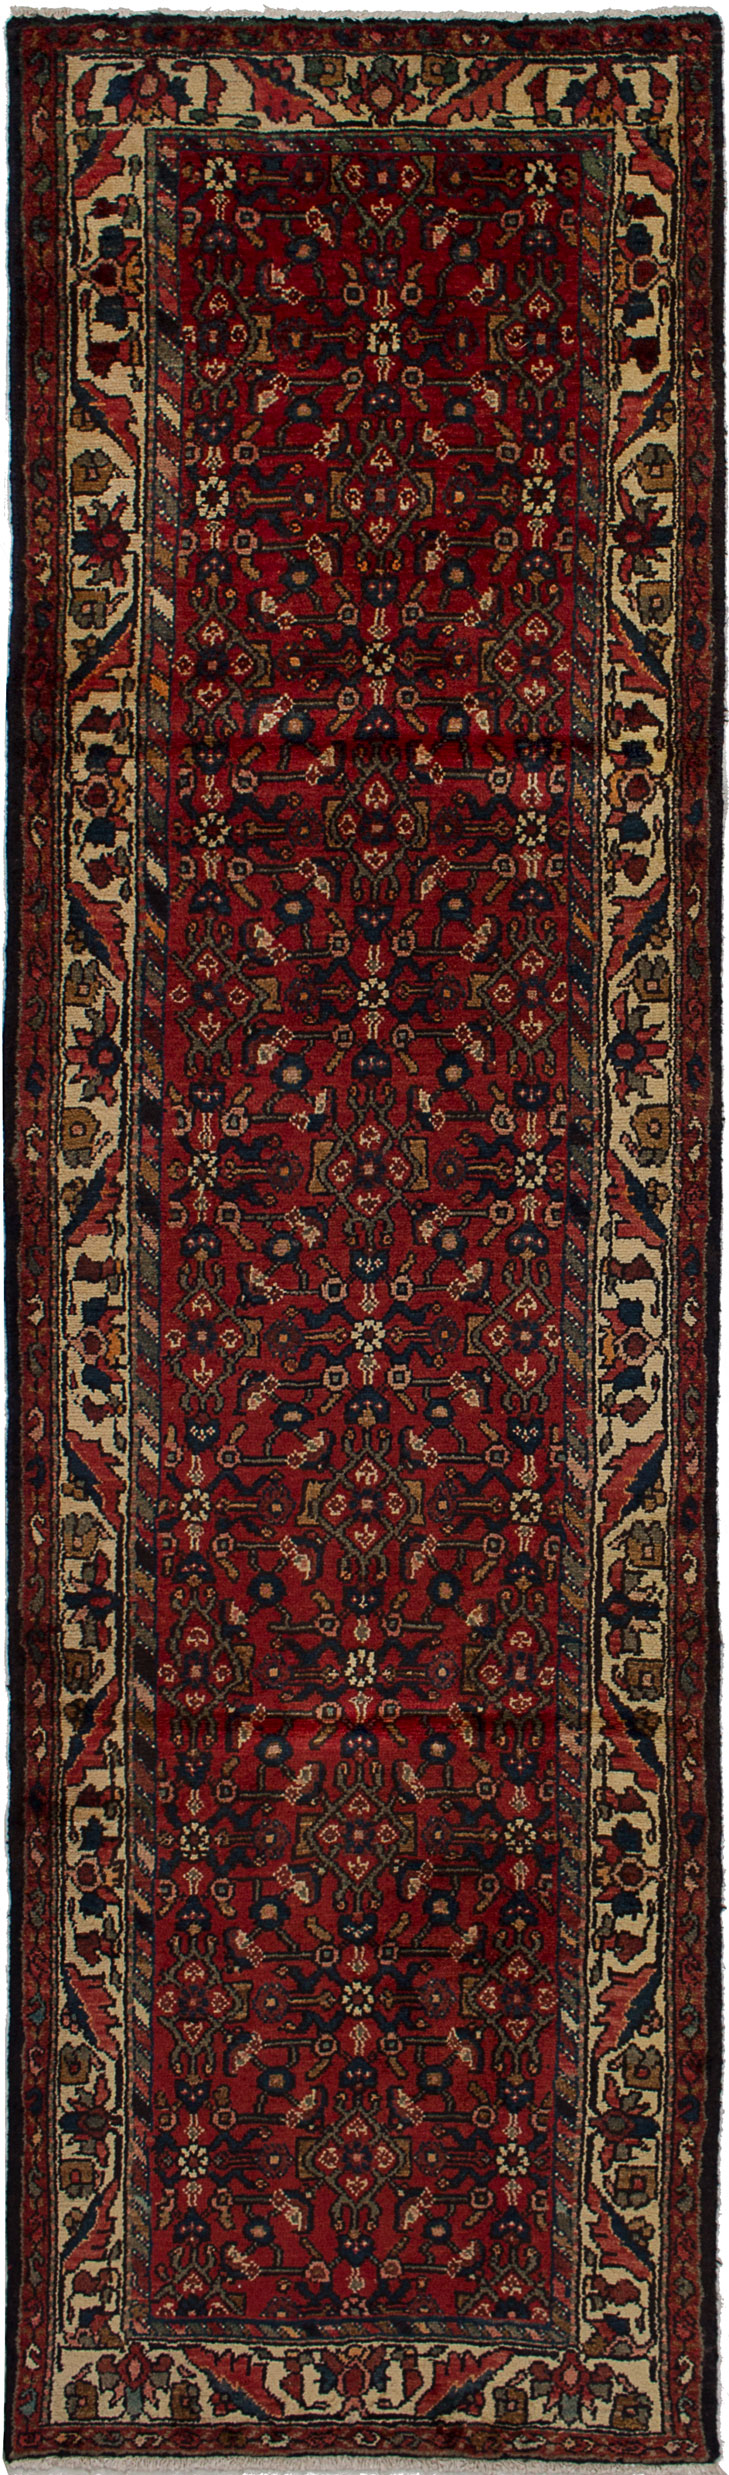 Hand-knotted Hamadan Red Wool Rug 2'8" x 9'9"  Size: 2'8" x 9'9"  